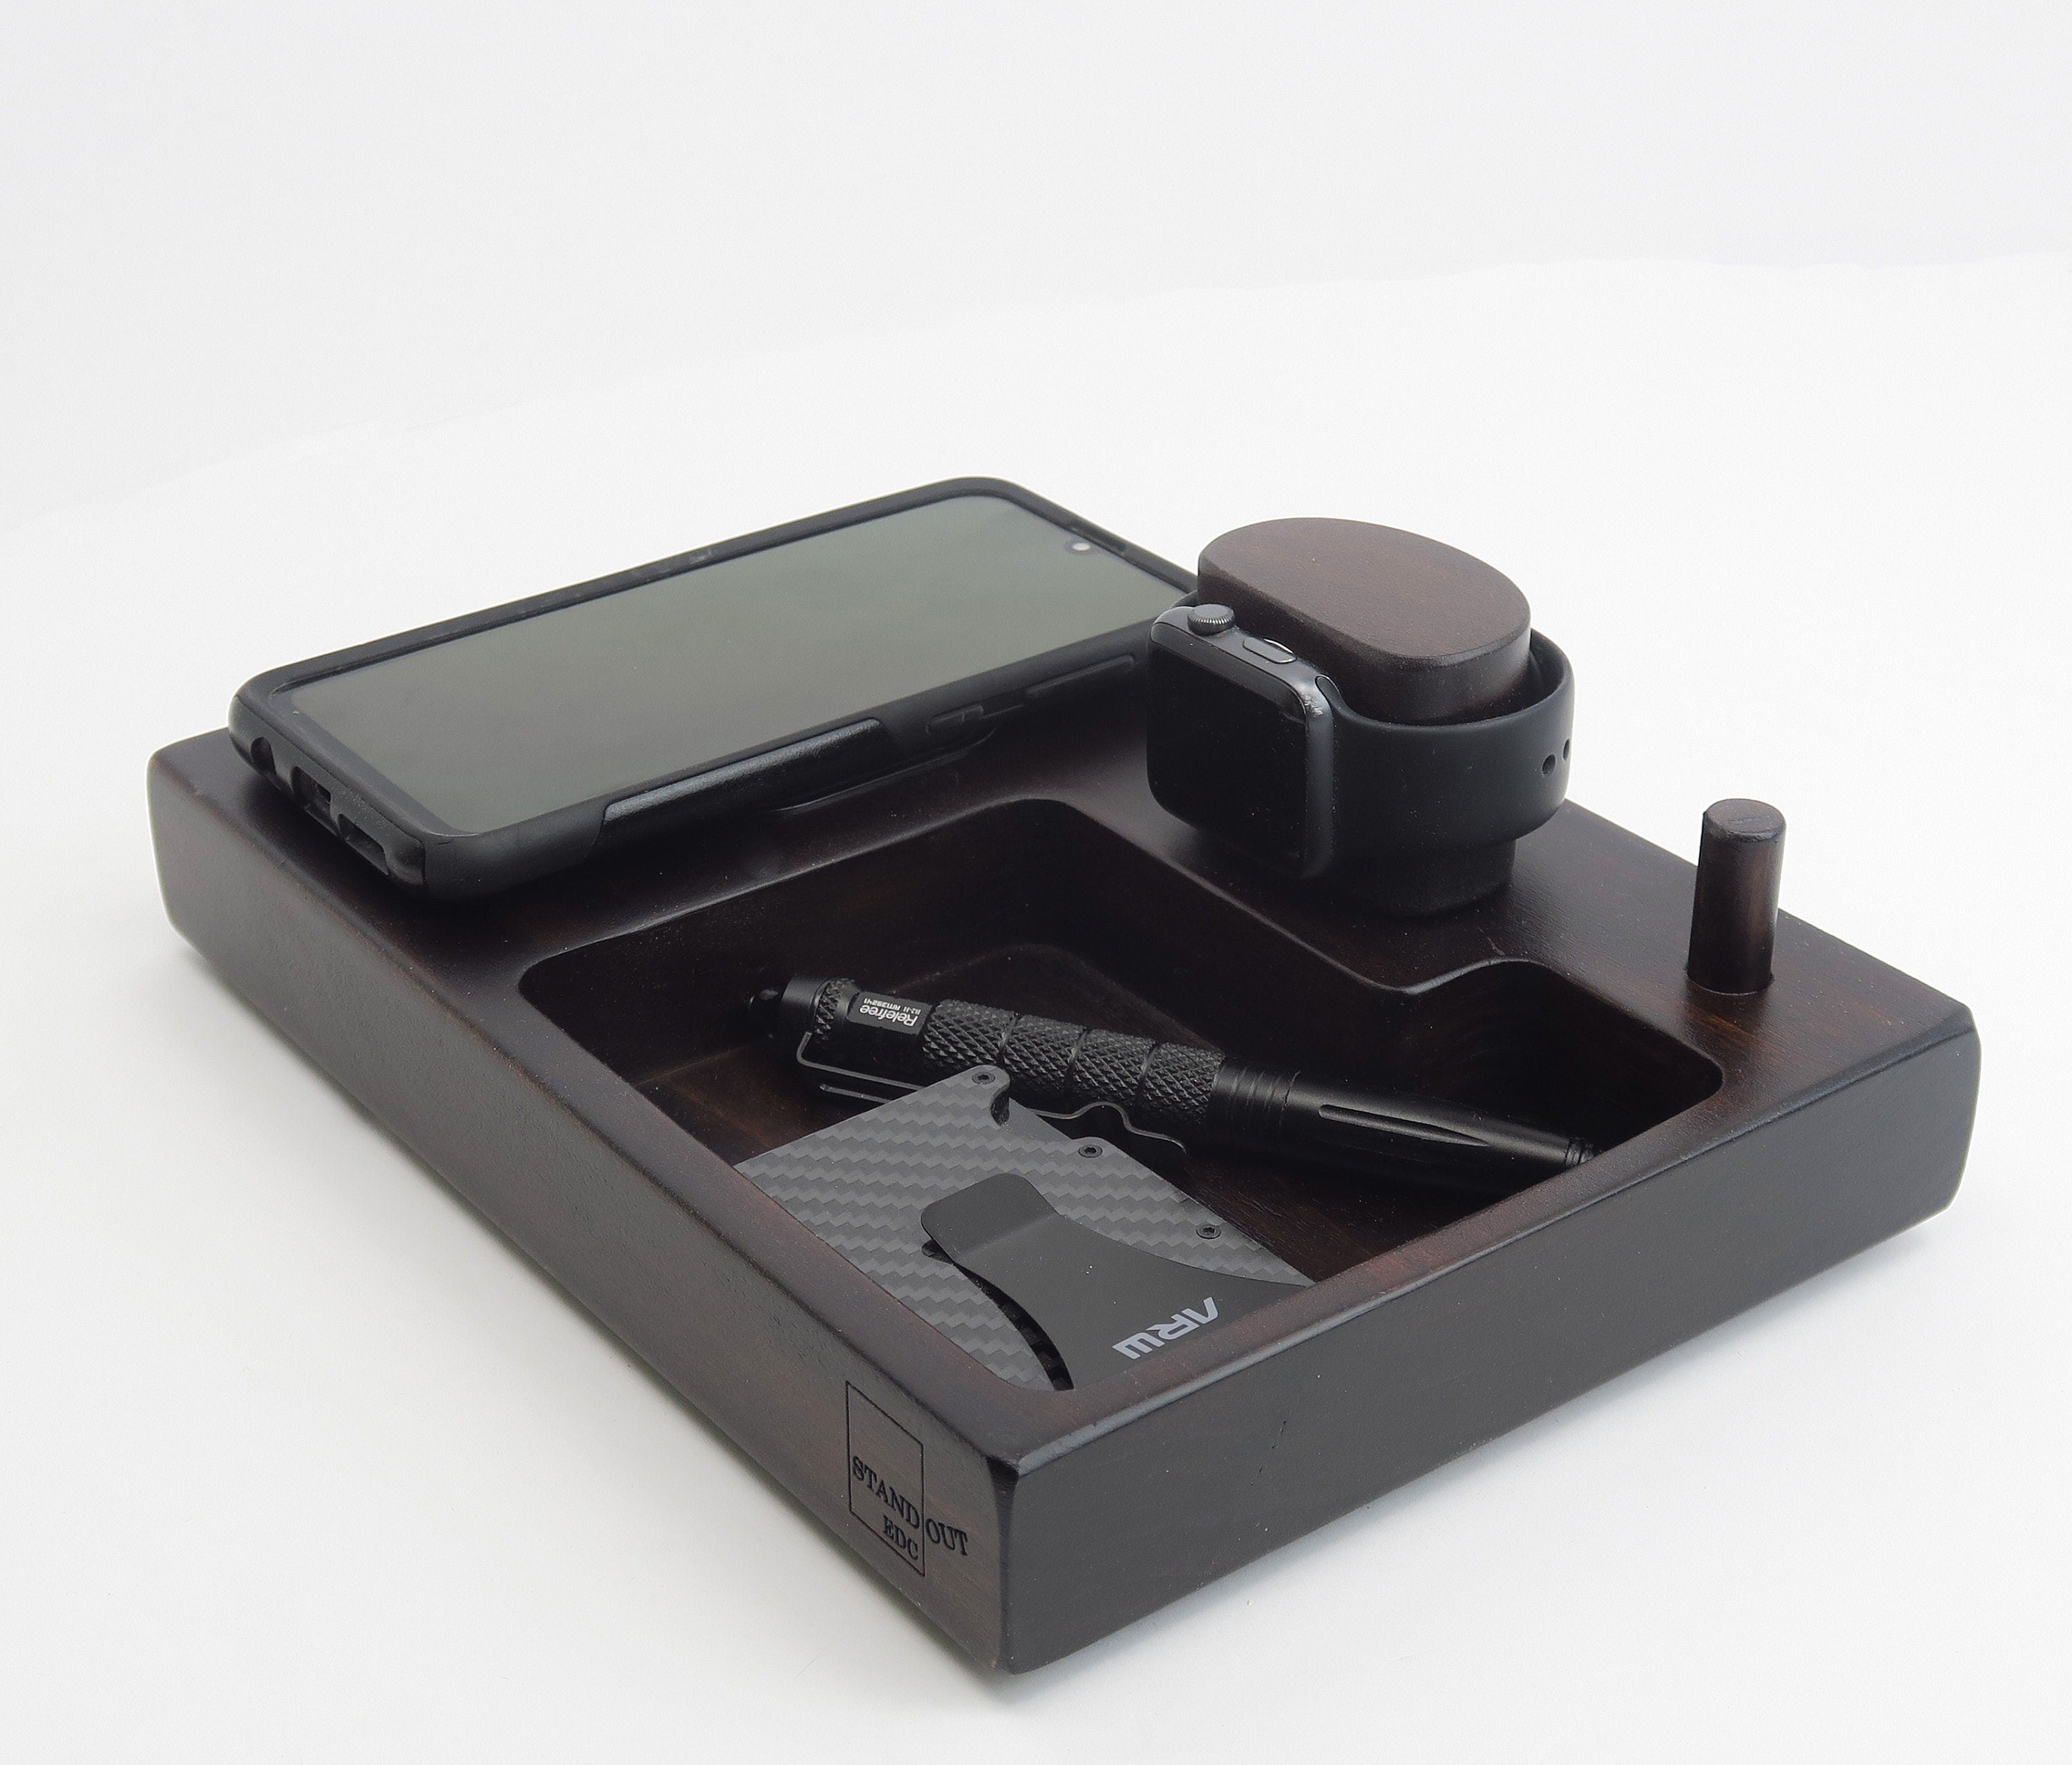 Wireless  Smartphone  and Watch Charging Station Features a hardwood Base  Standout EDC   